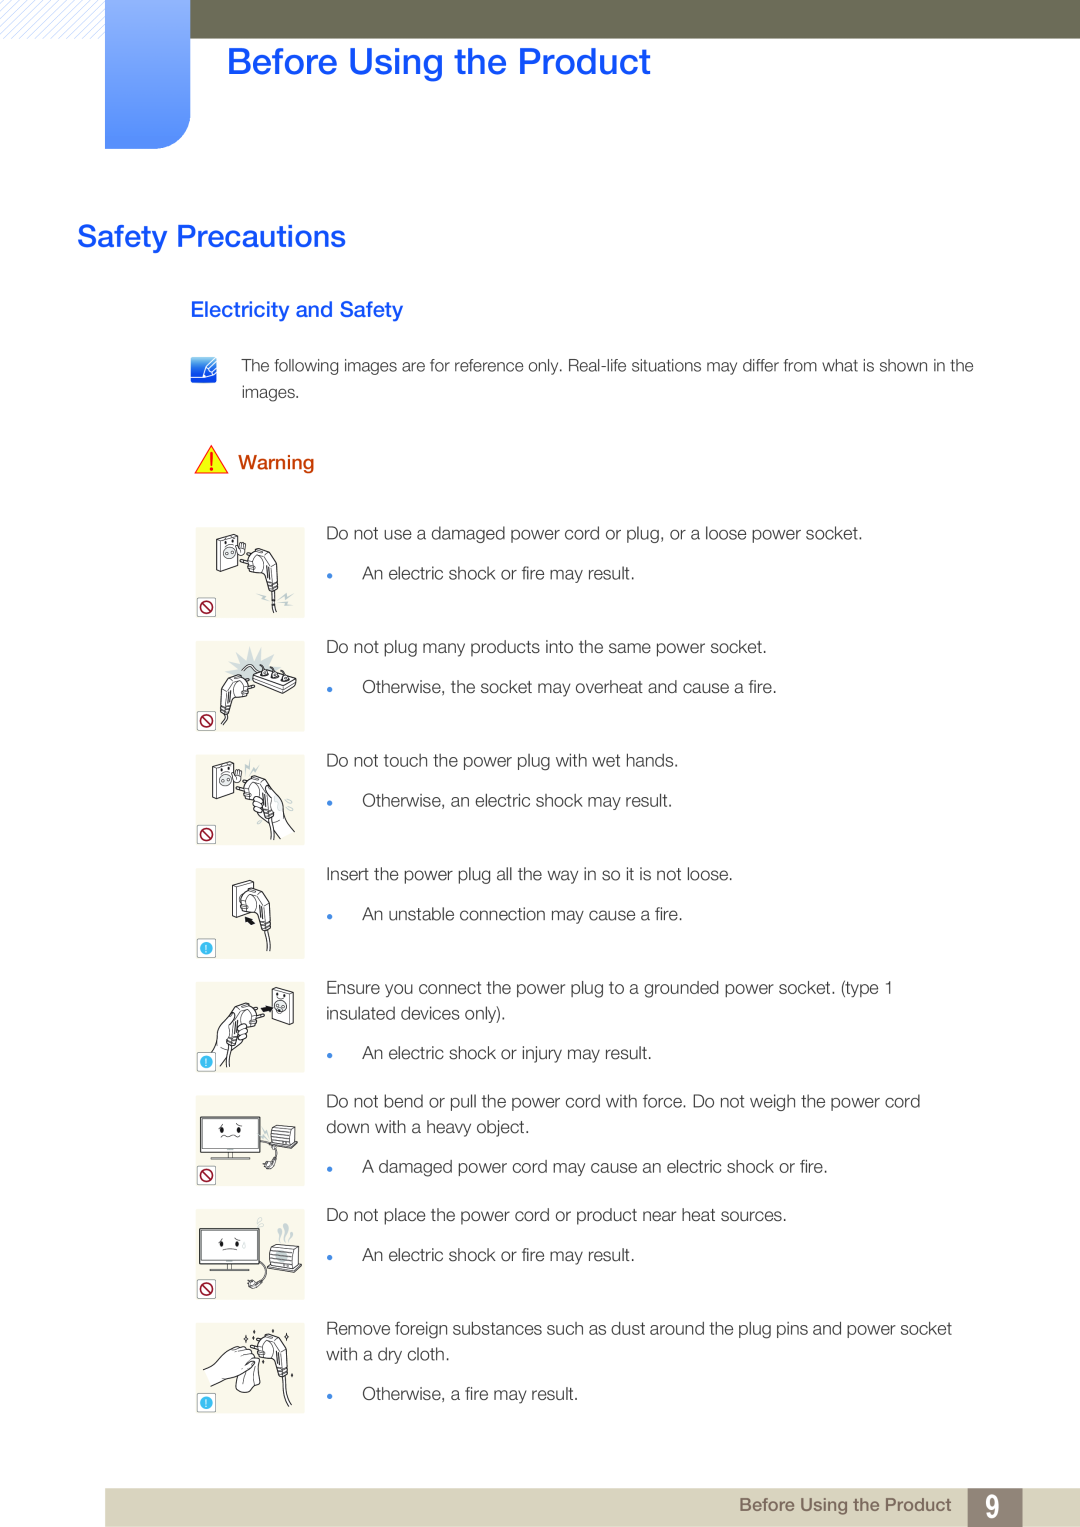 Samsung LS19B310ES/ZN, LS19B310ES/AF, LS19B310ES/SM Safety Precautions, Electricity and Safety, Before Using the Product 